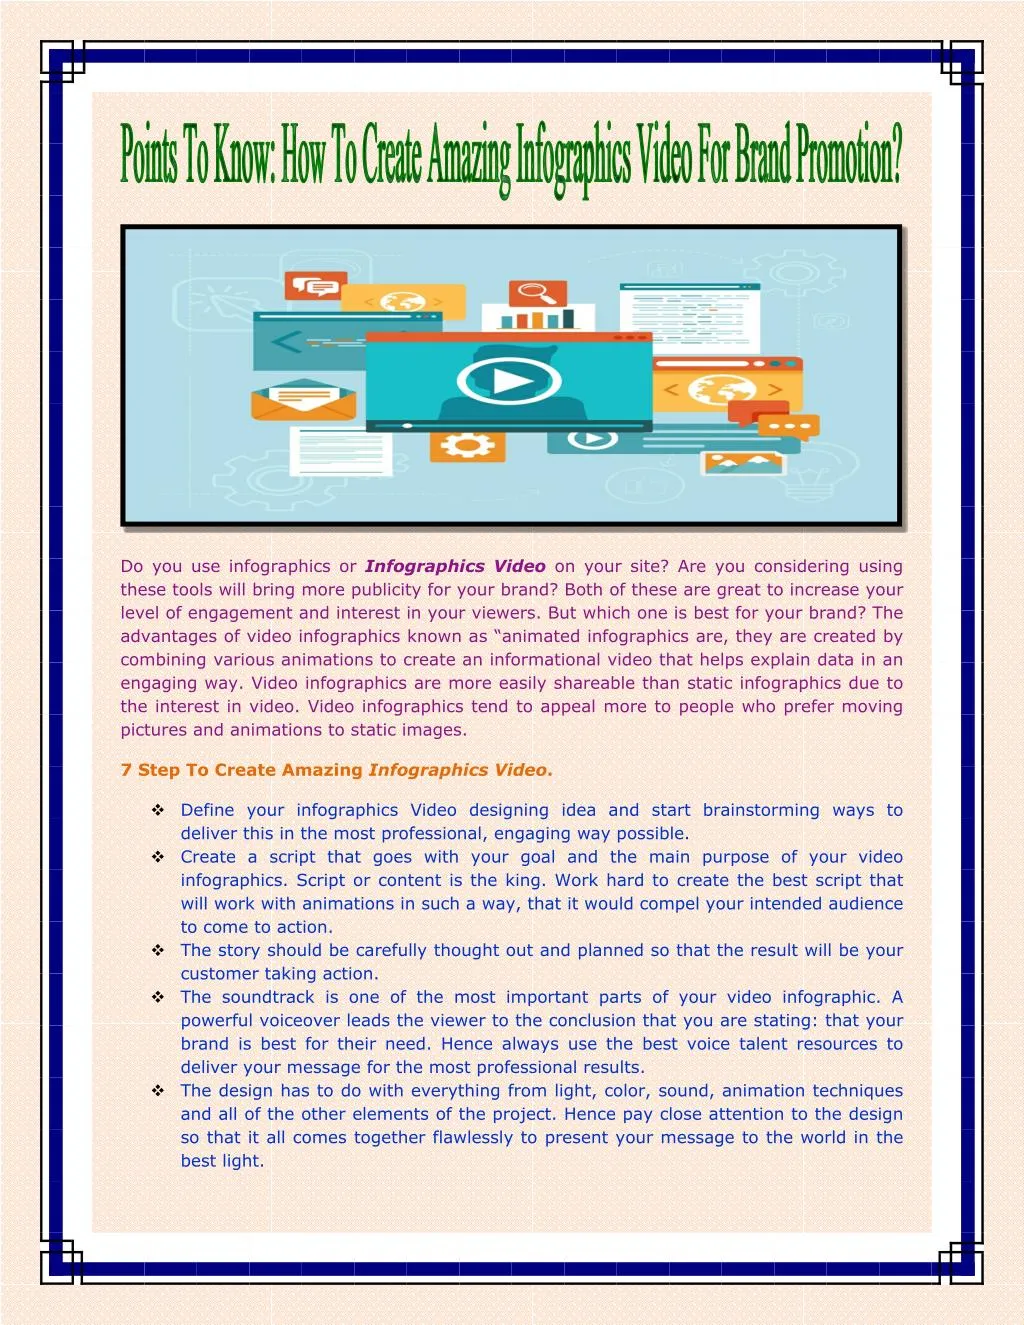 do you use infographics or infographics video